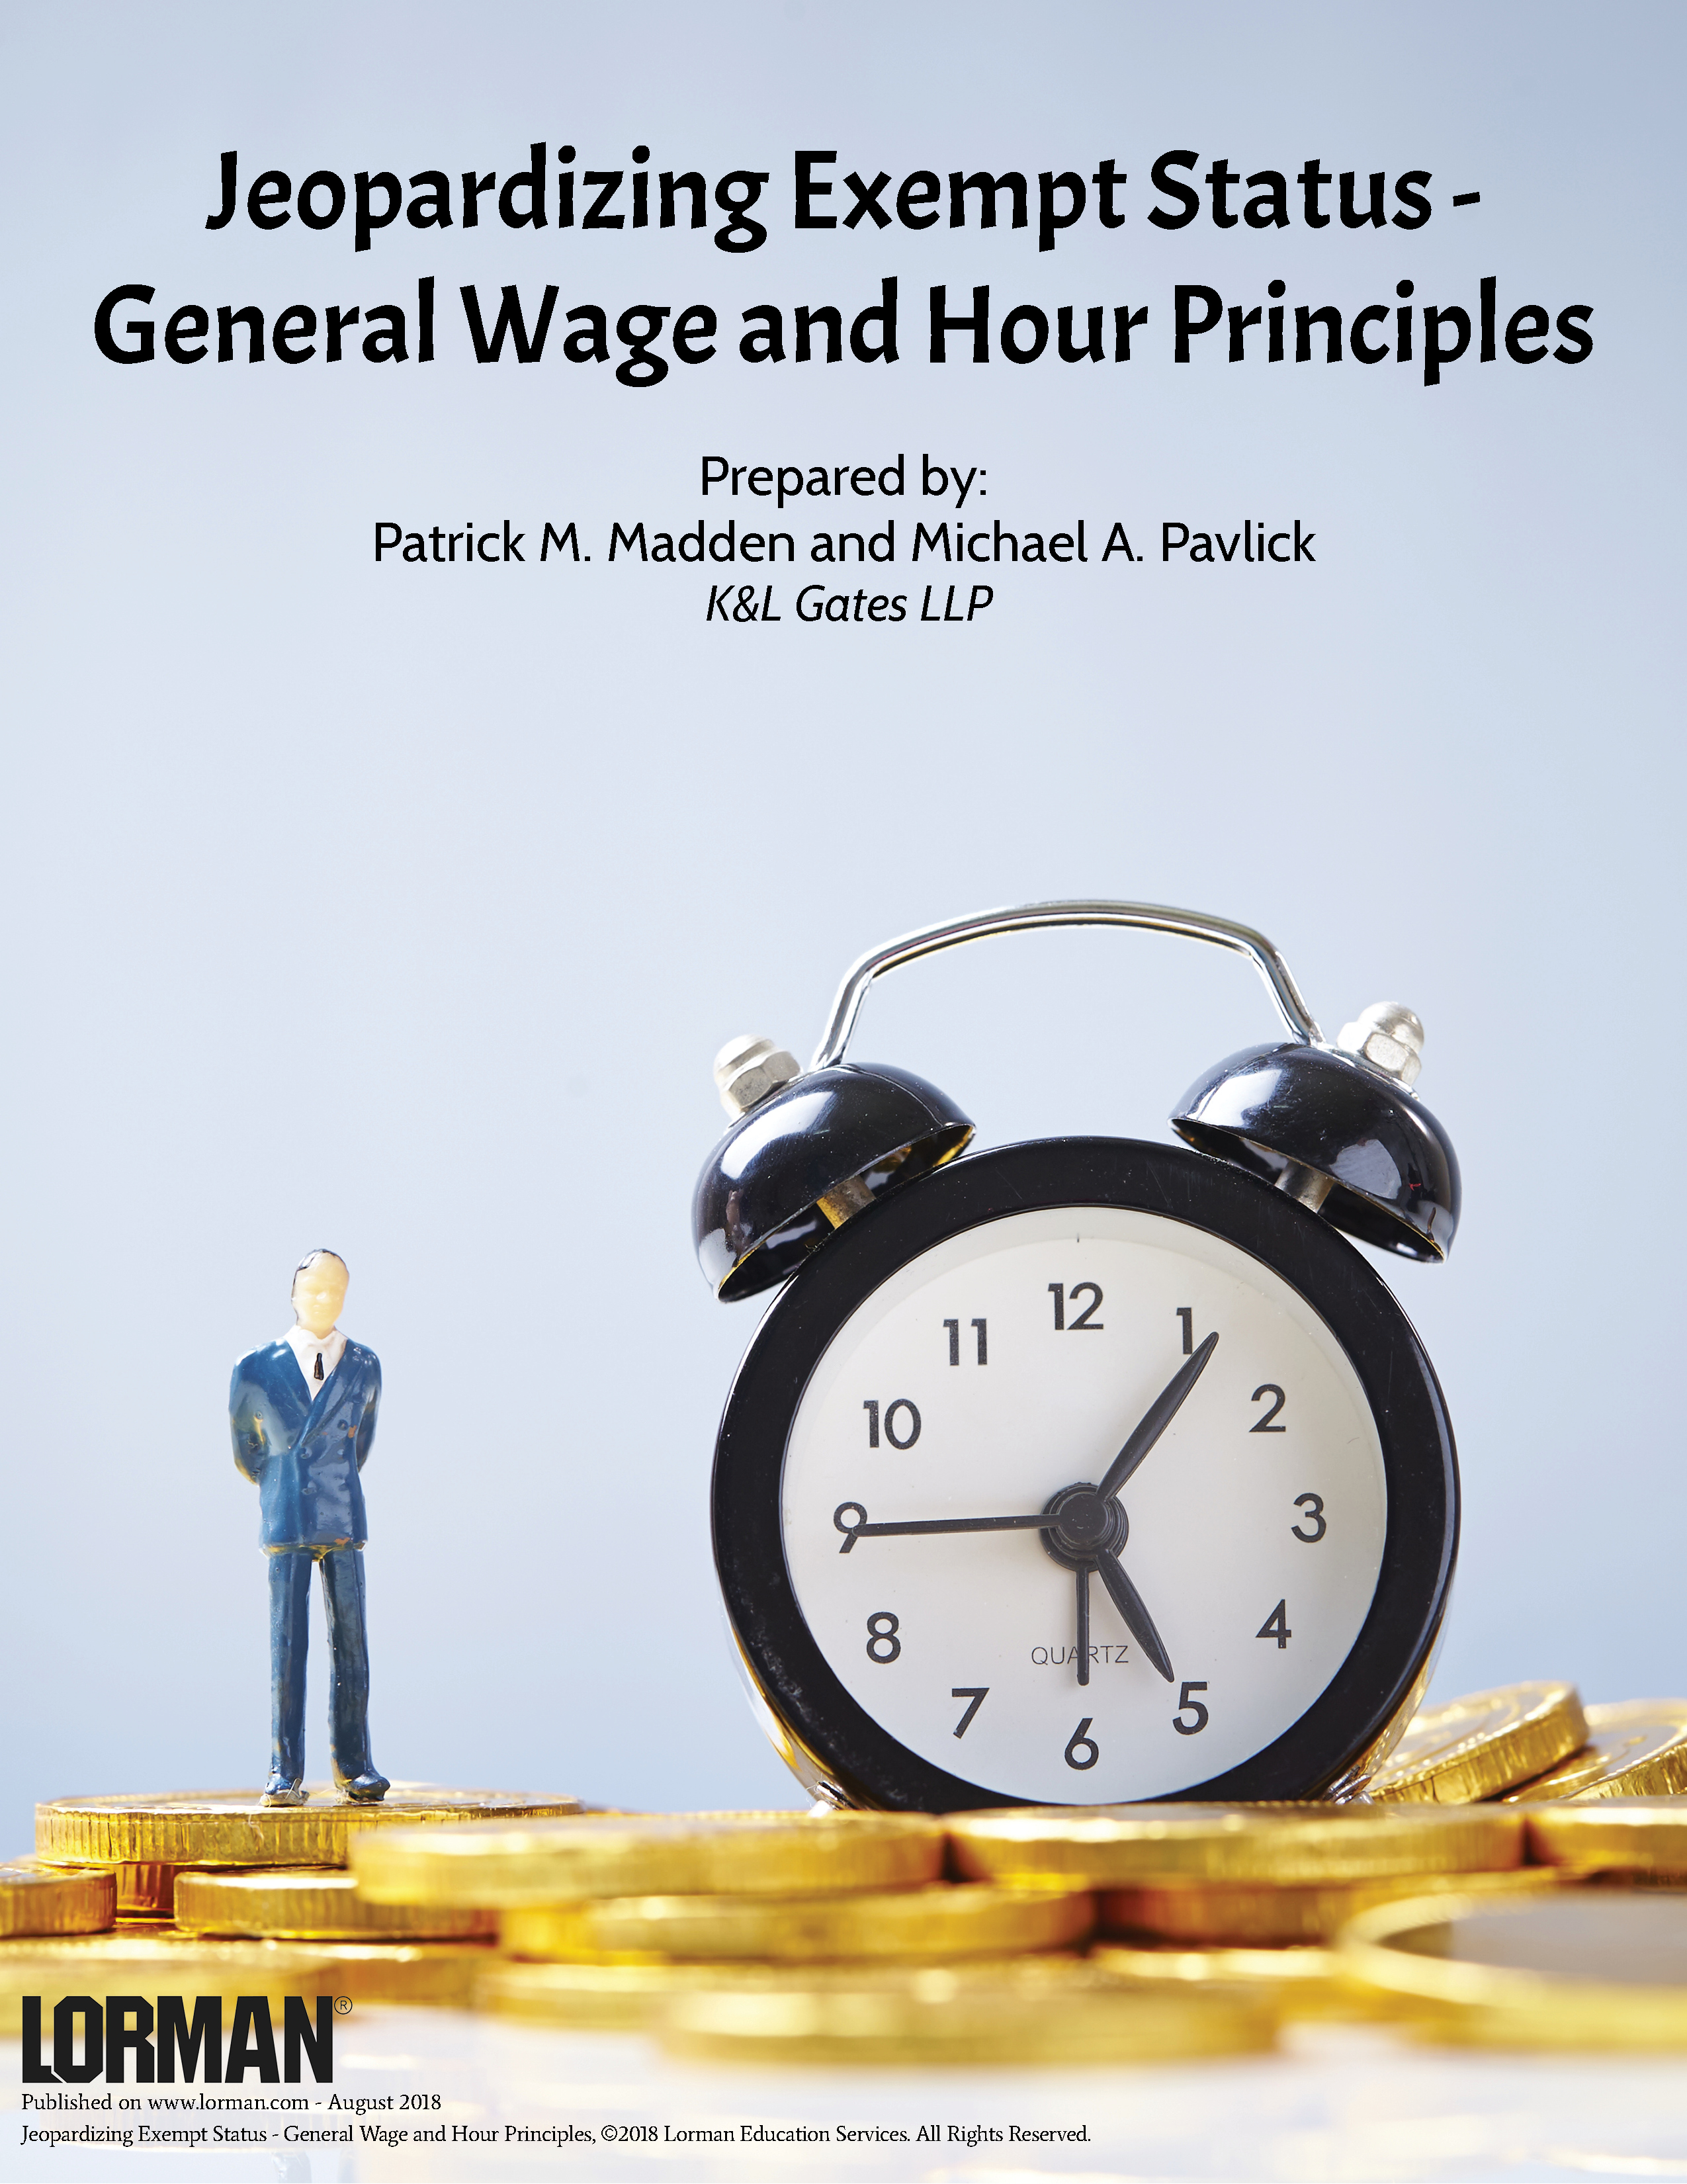 Jeopardizing Exempt Status - General Wage and Hour Principles